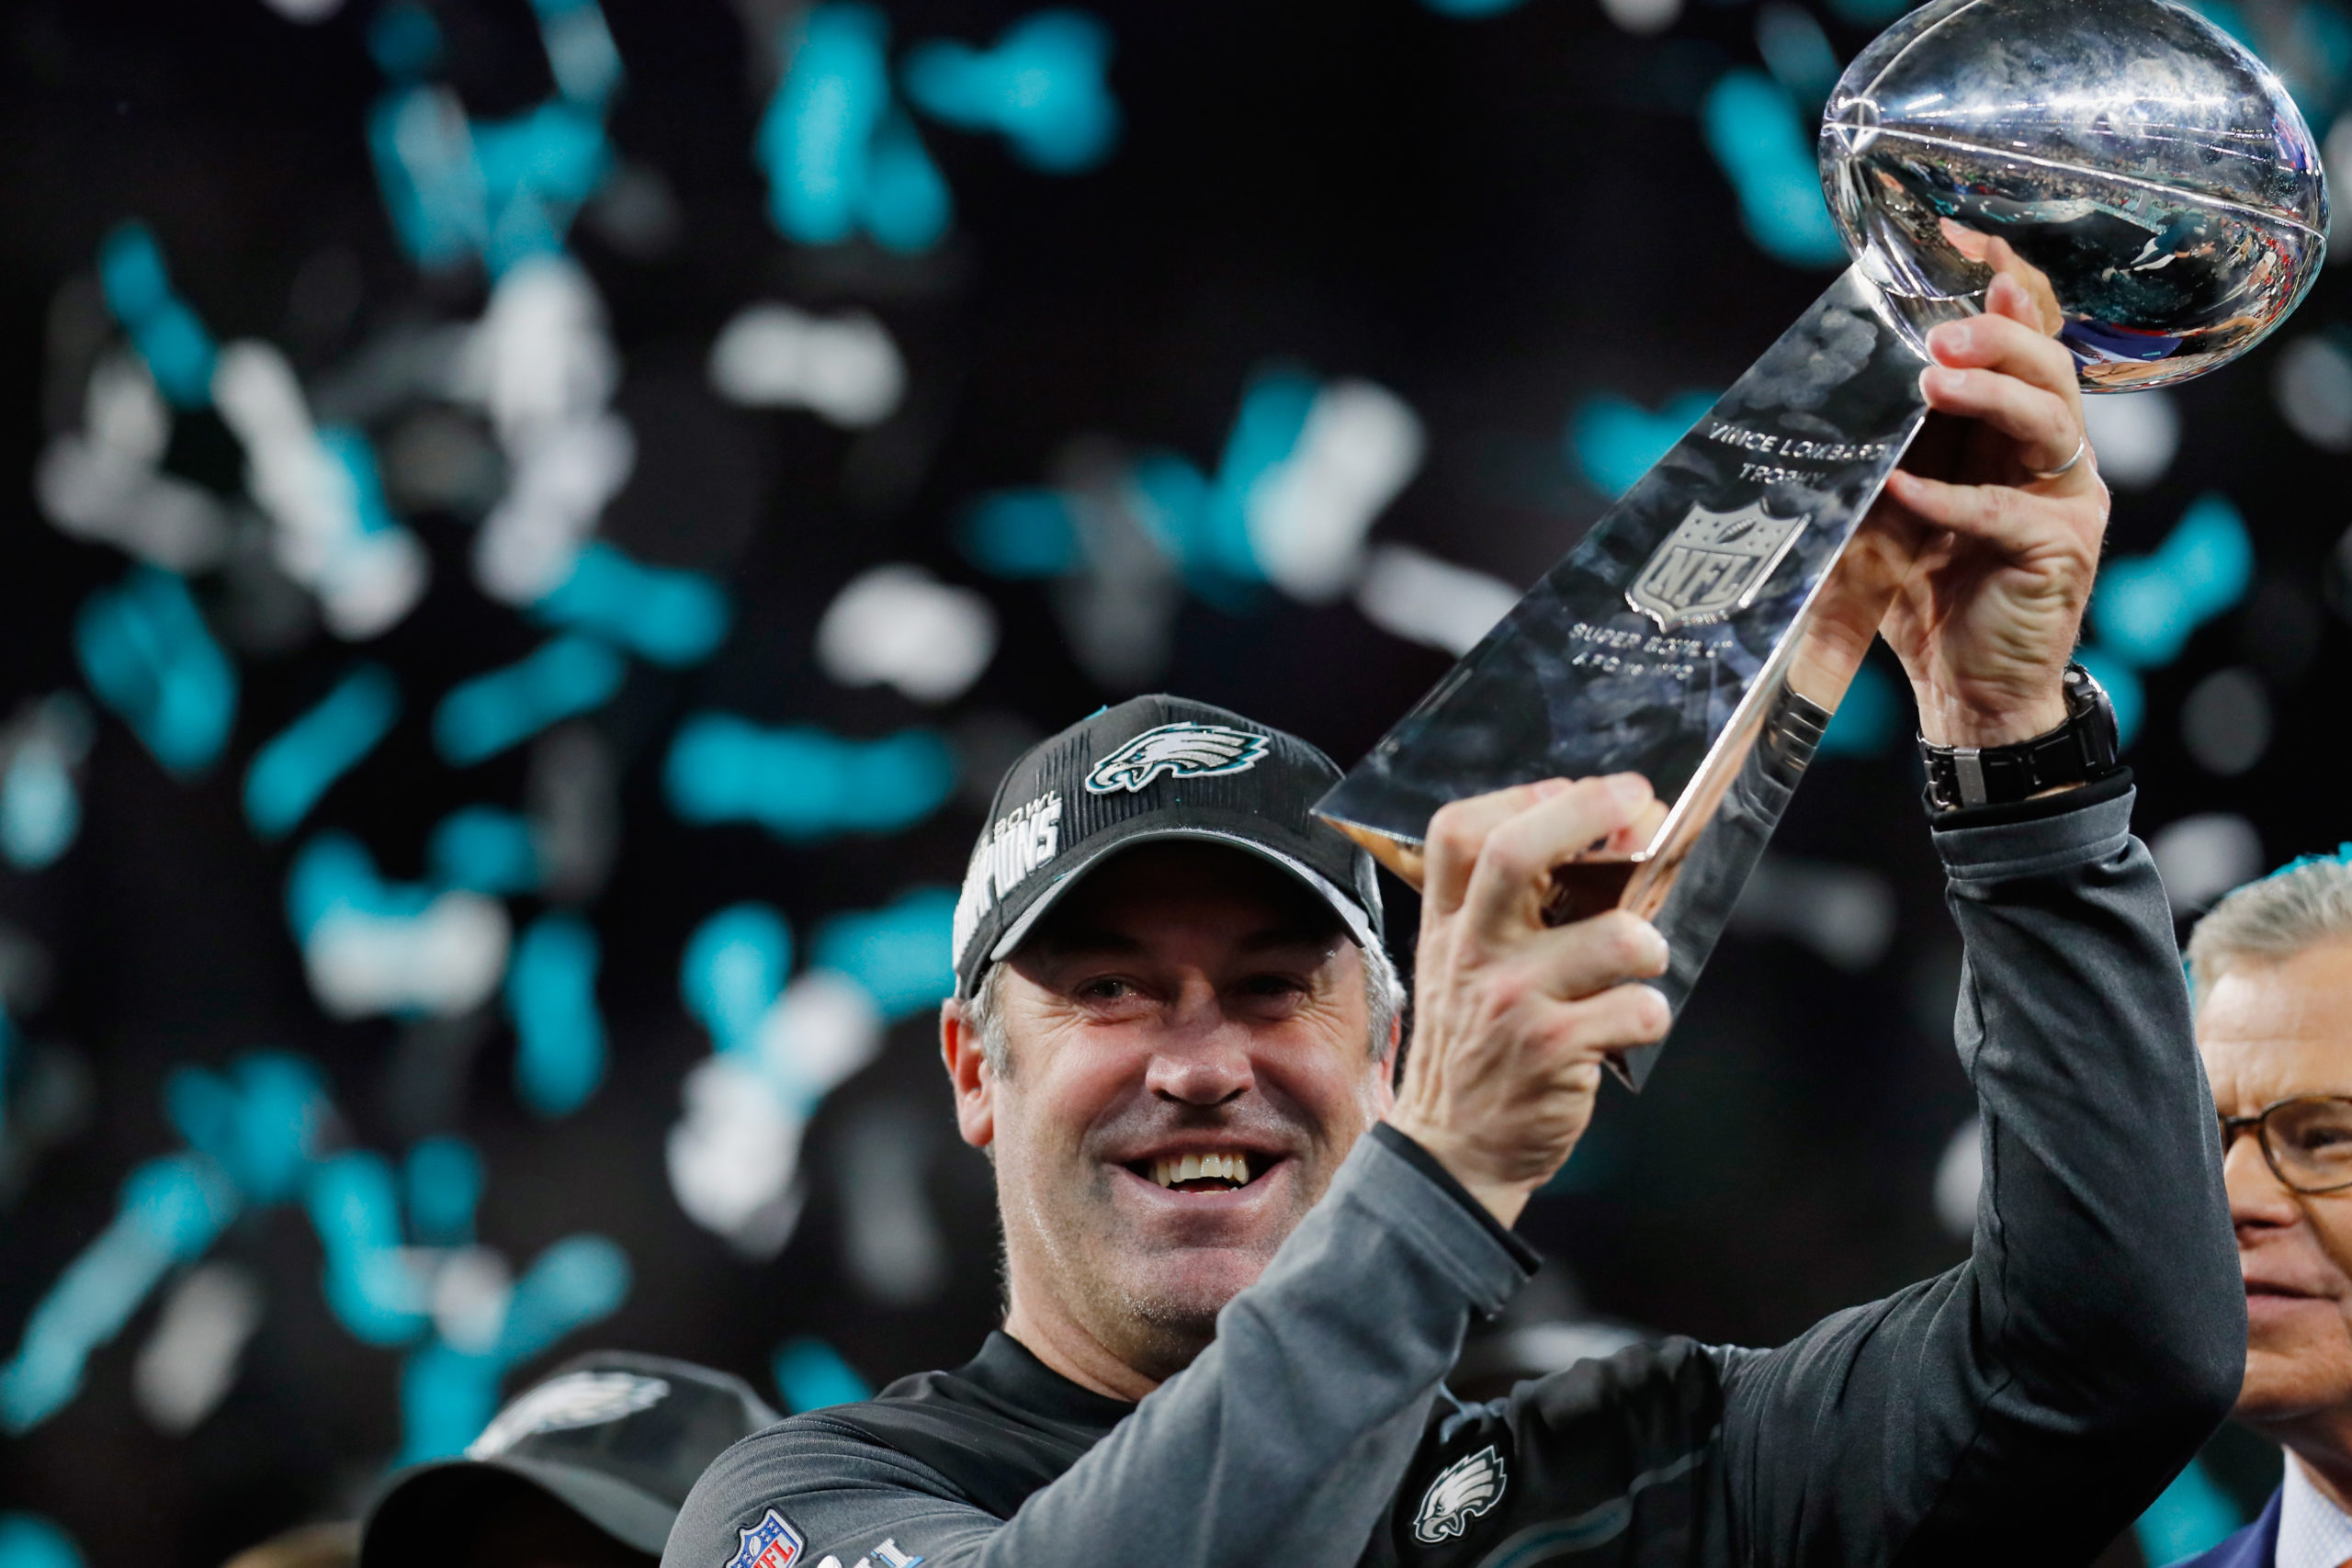 MINNEAPOLIS, MN - FEBRUARY 04: Head coach Doug Pederson of the Philadelphia Eagles celebrates with the Vince Lombardi Tropy after his teams 41-33 victory over the New England Patriots in Super Bowl LII at U.S. Bank Stadium on February 4, 2018 in Minneapolis, Minnesota. The Philadelphia Eagles defeated the New England Patriots 41-33. Kevin C. Cox/Getty Images